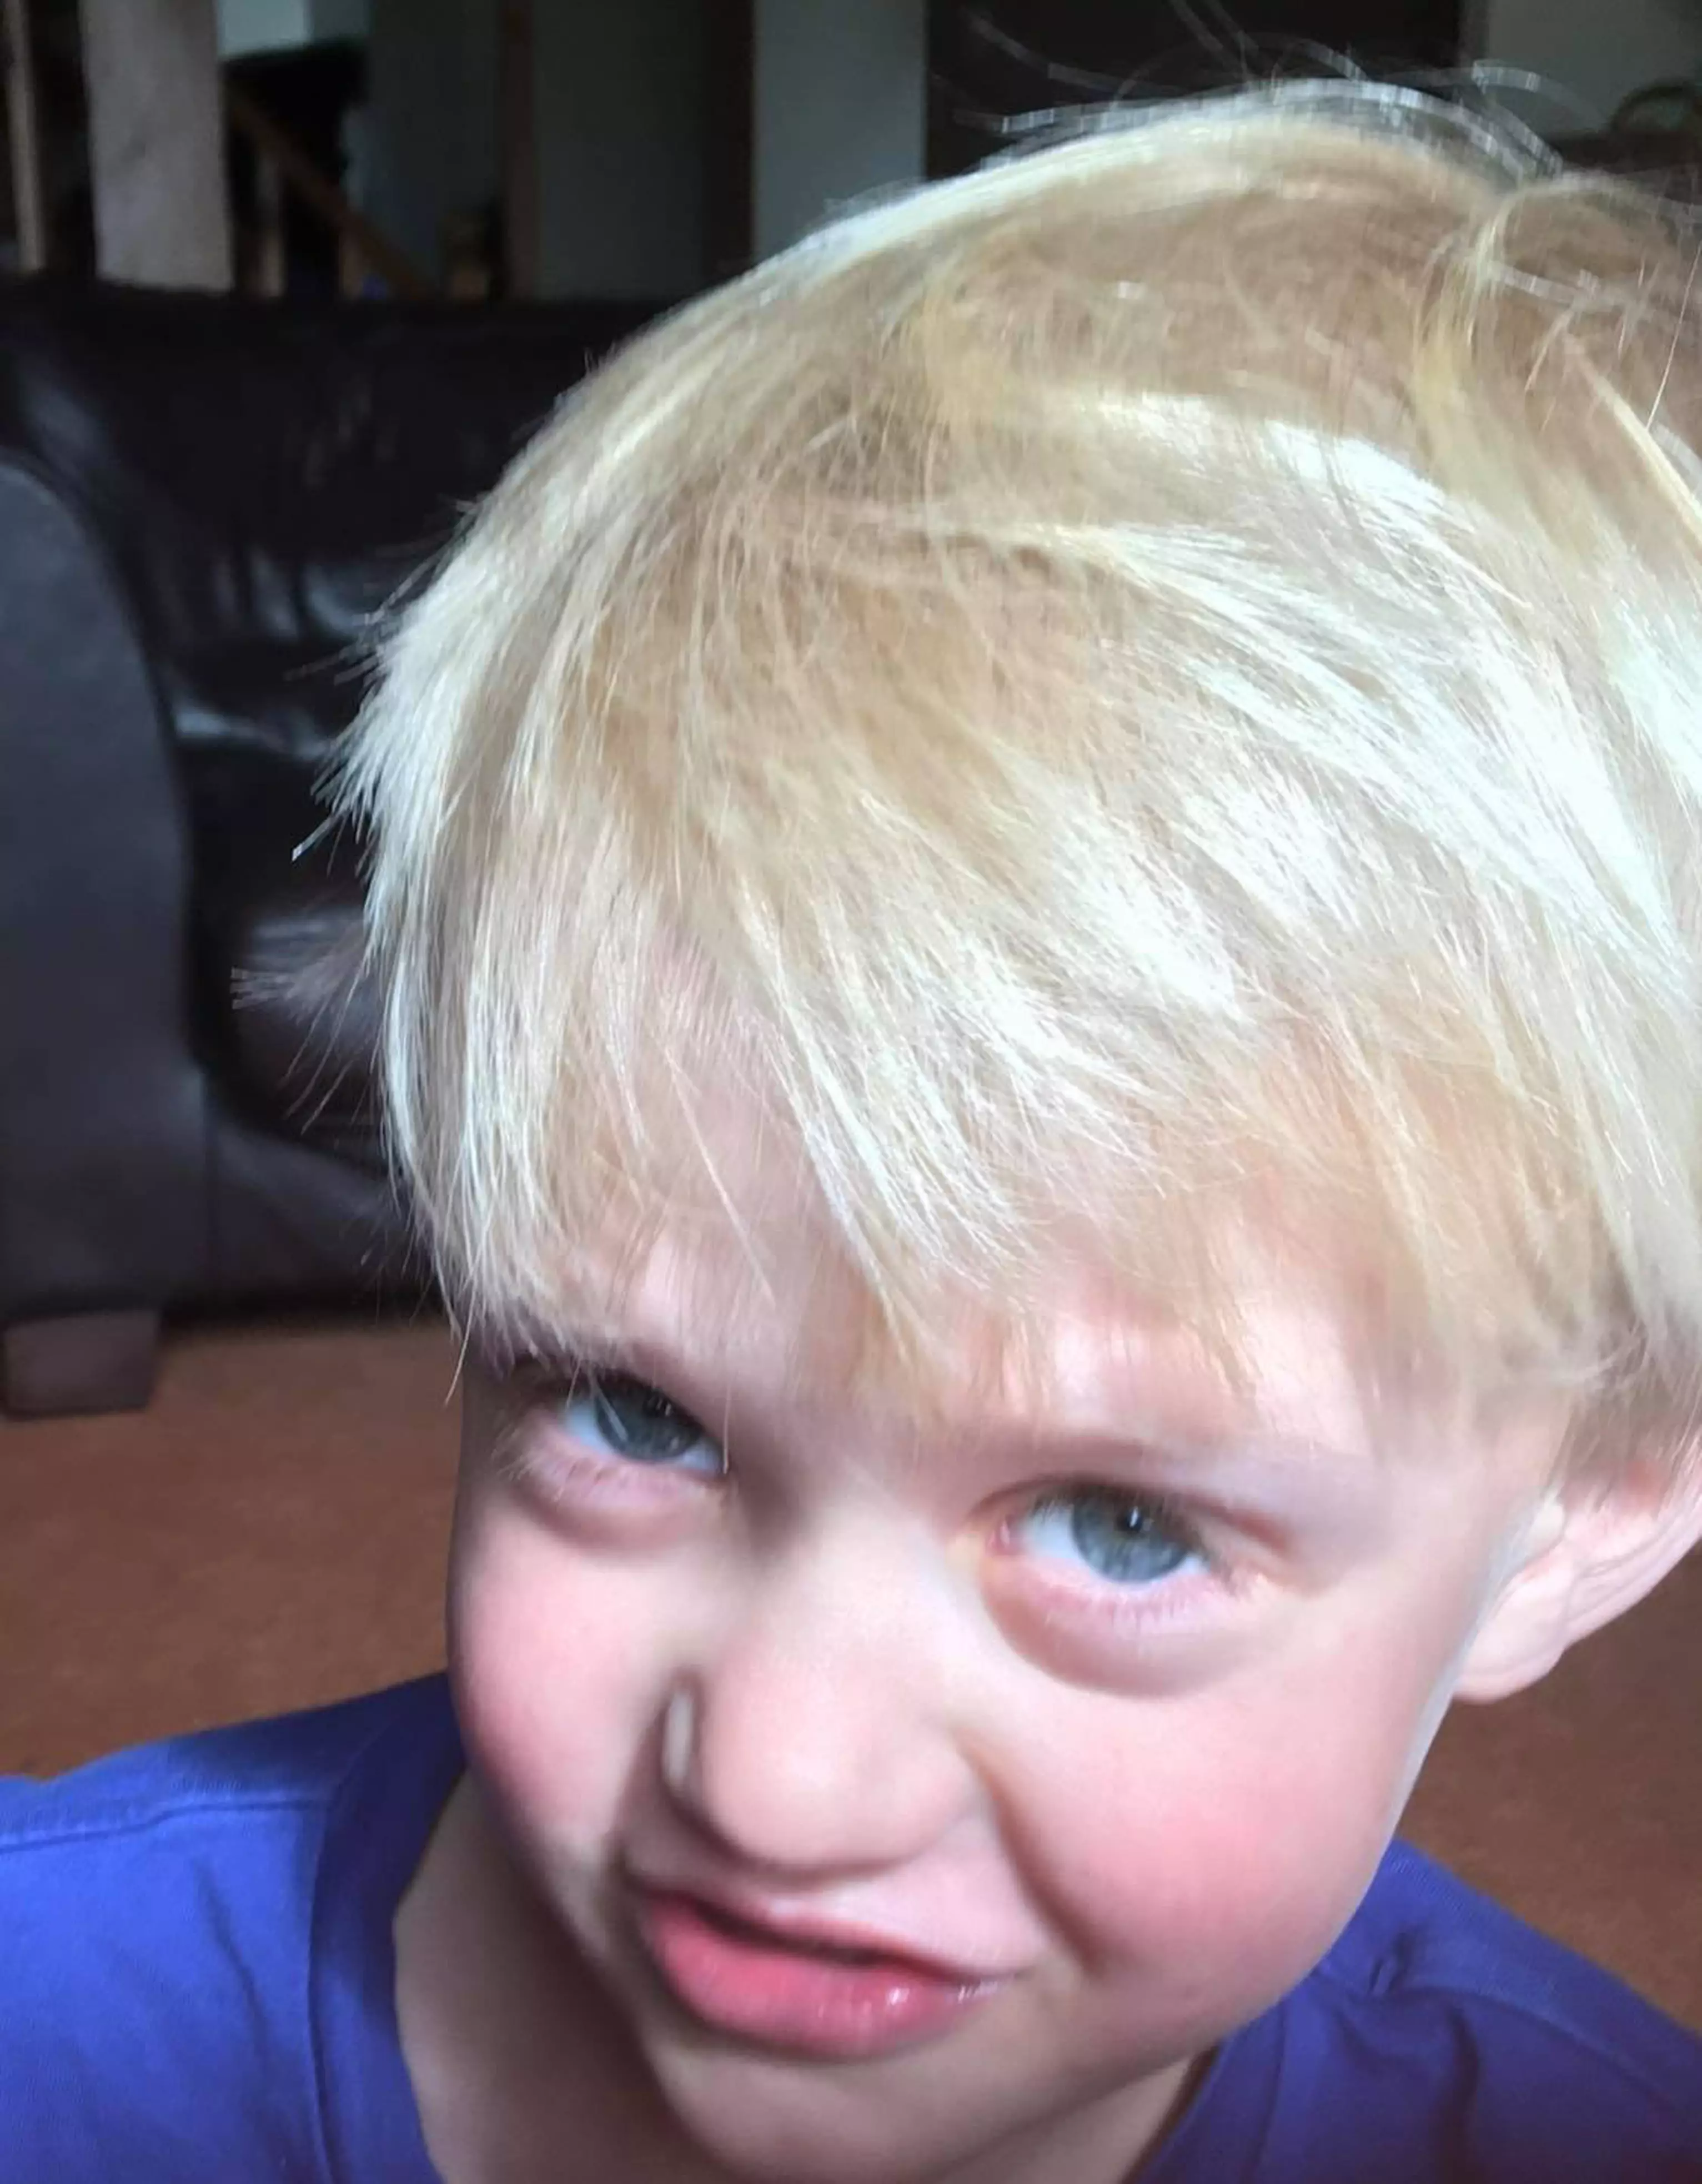 One mum was left in hysterics when her son took a pair of children's scissors to his blonde locks (